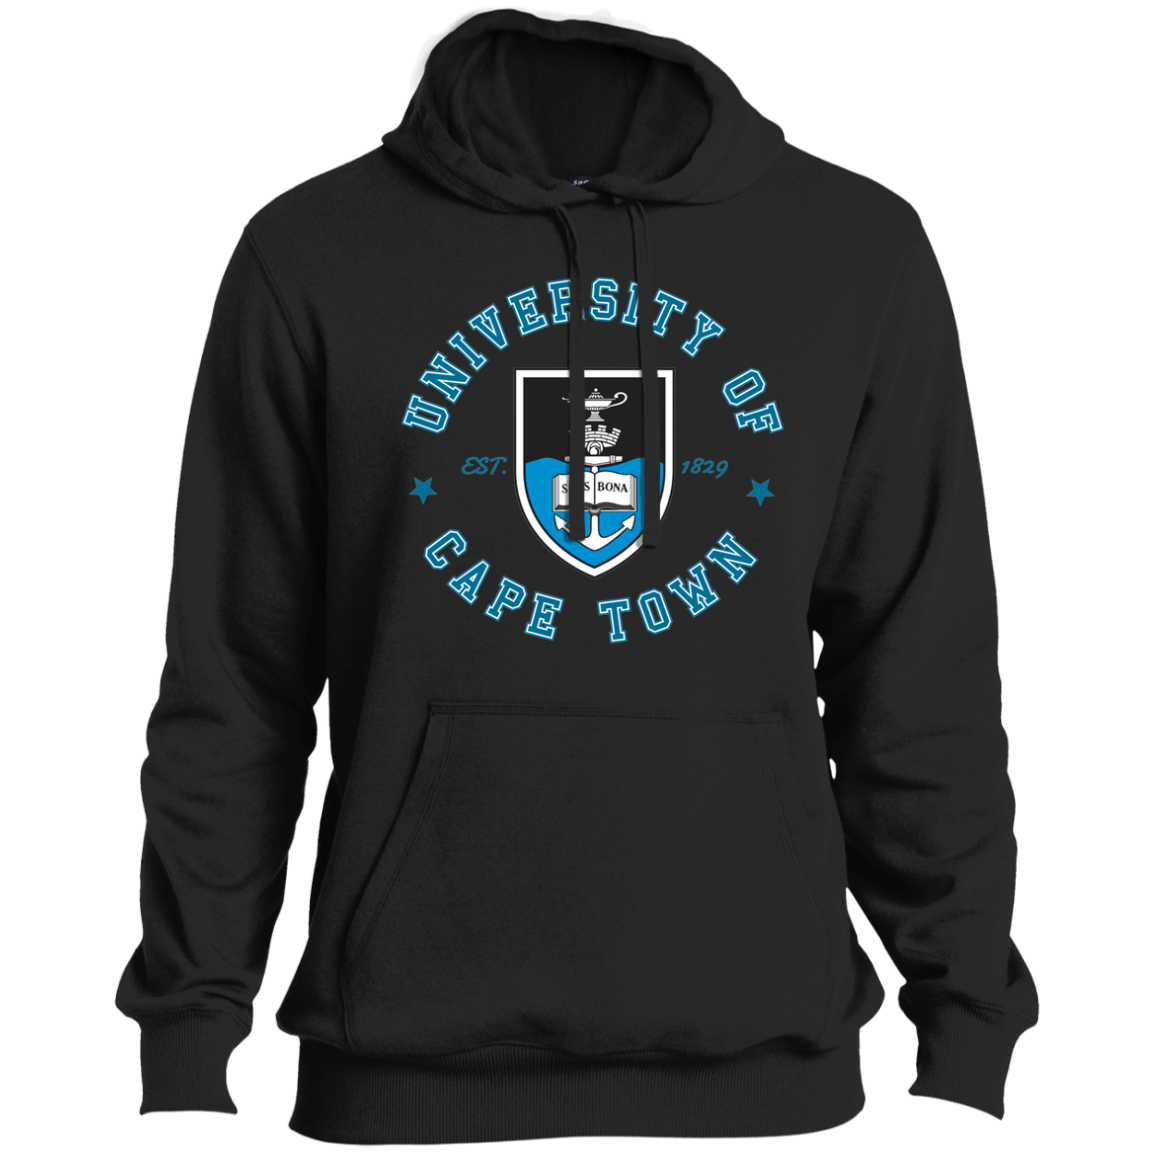 University of Cape Town (UCT) Men's Pullover Hoodie